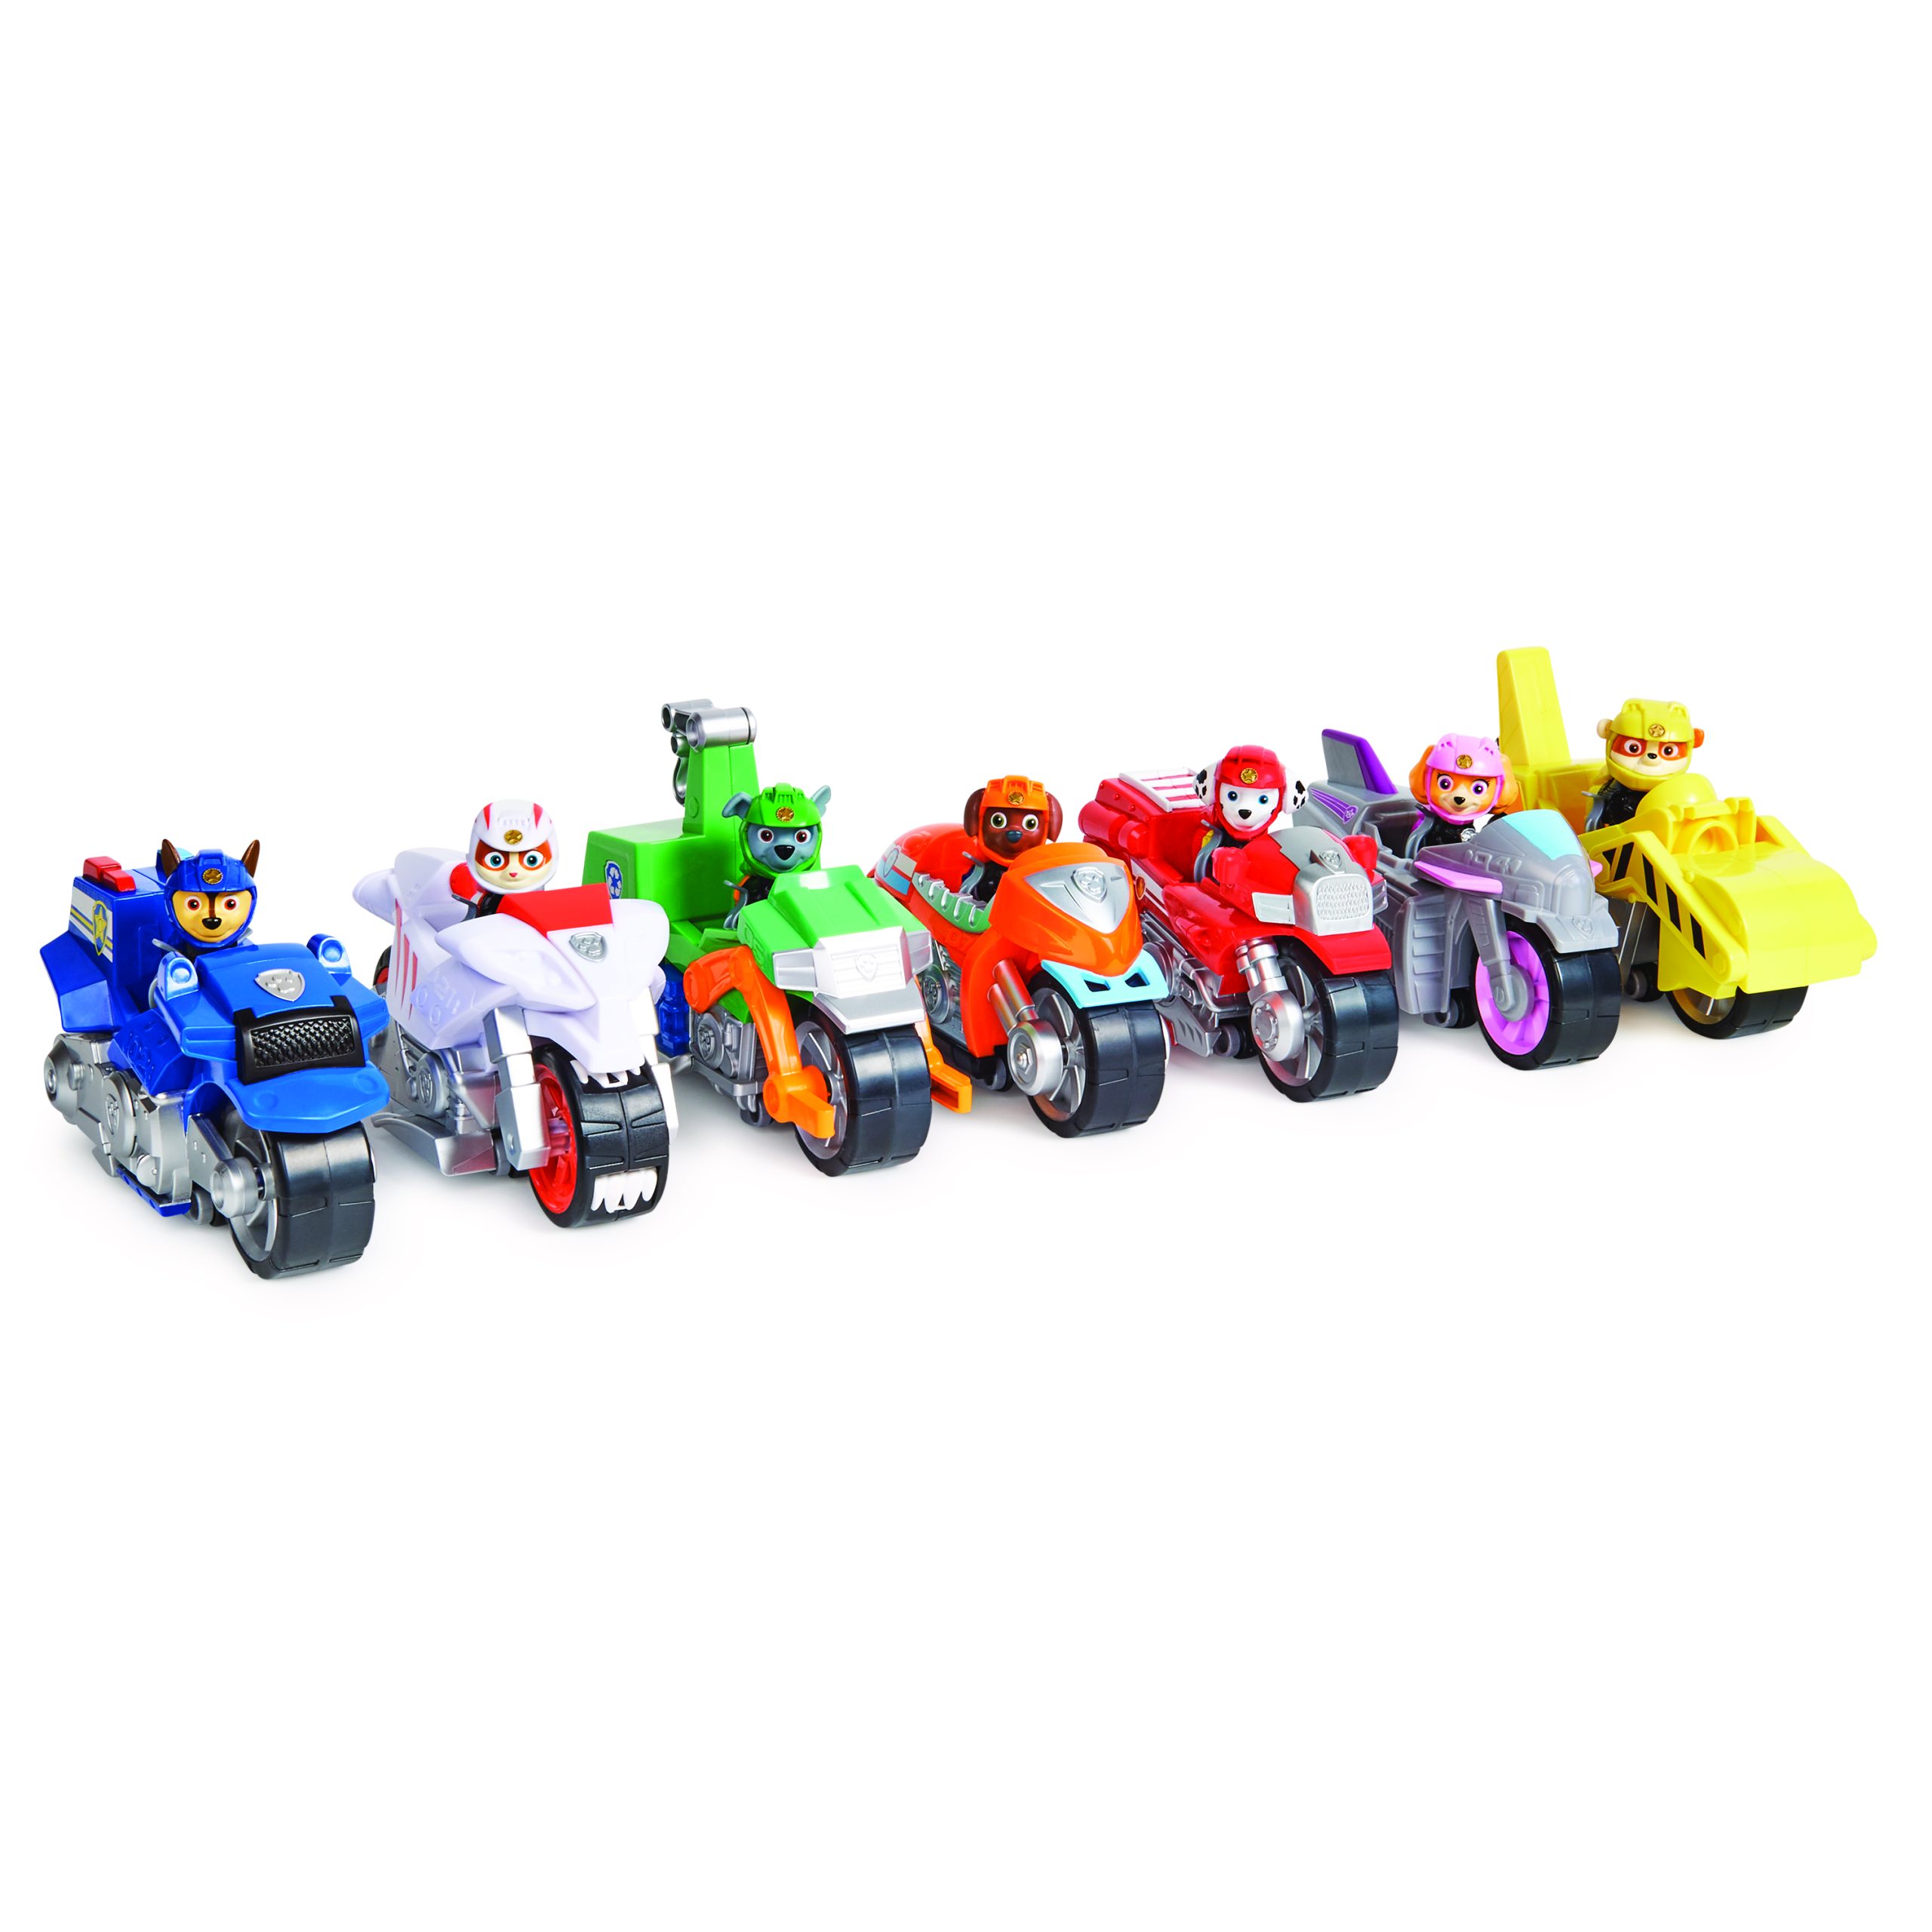 Spin Master Paw Patrol - Moto Pups - Rubble Deluxe Vehicle